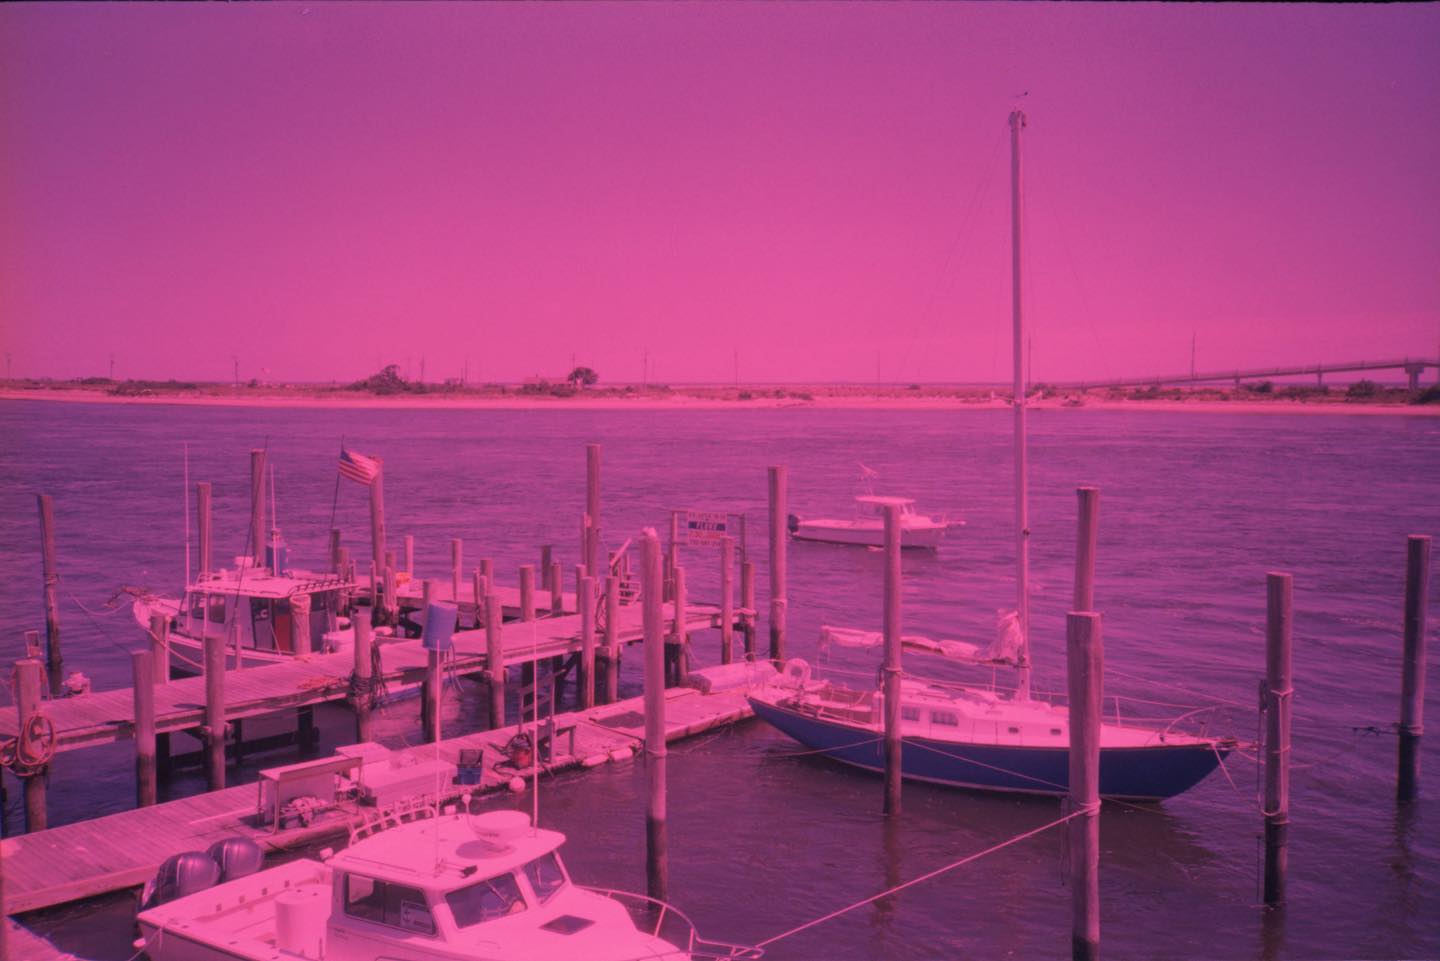 Harbor. 
Shot with my #olympusxa on well-expired Mitsubishi MXIII-100, with all the funky colors that that implies. #film #filmphotography #expiredfilm #mitsubishimxiii100 #shootfilmstaybroke